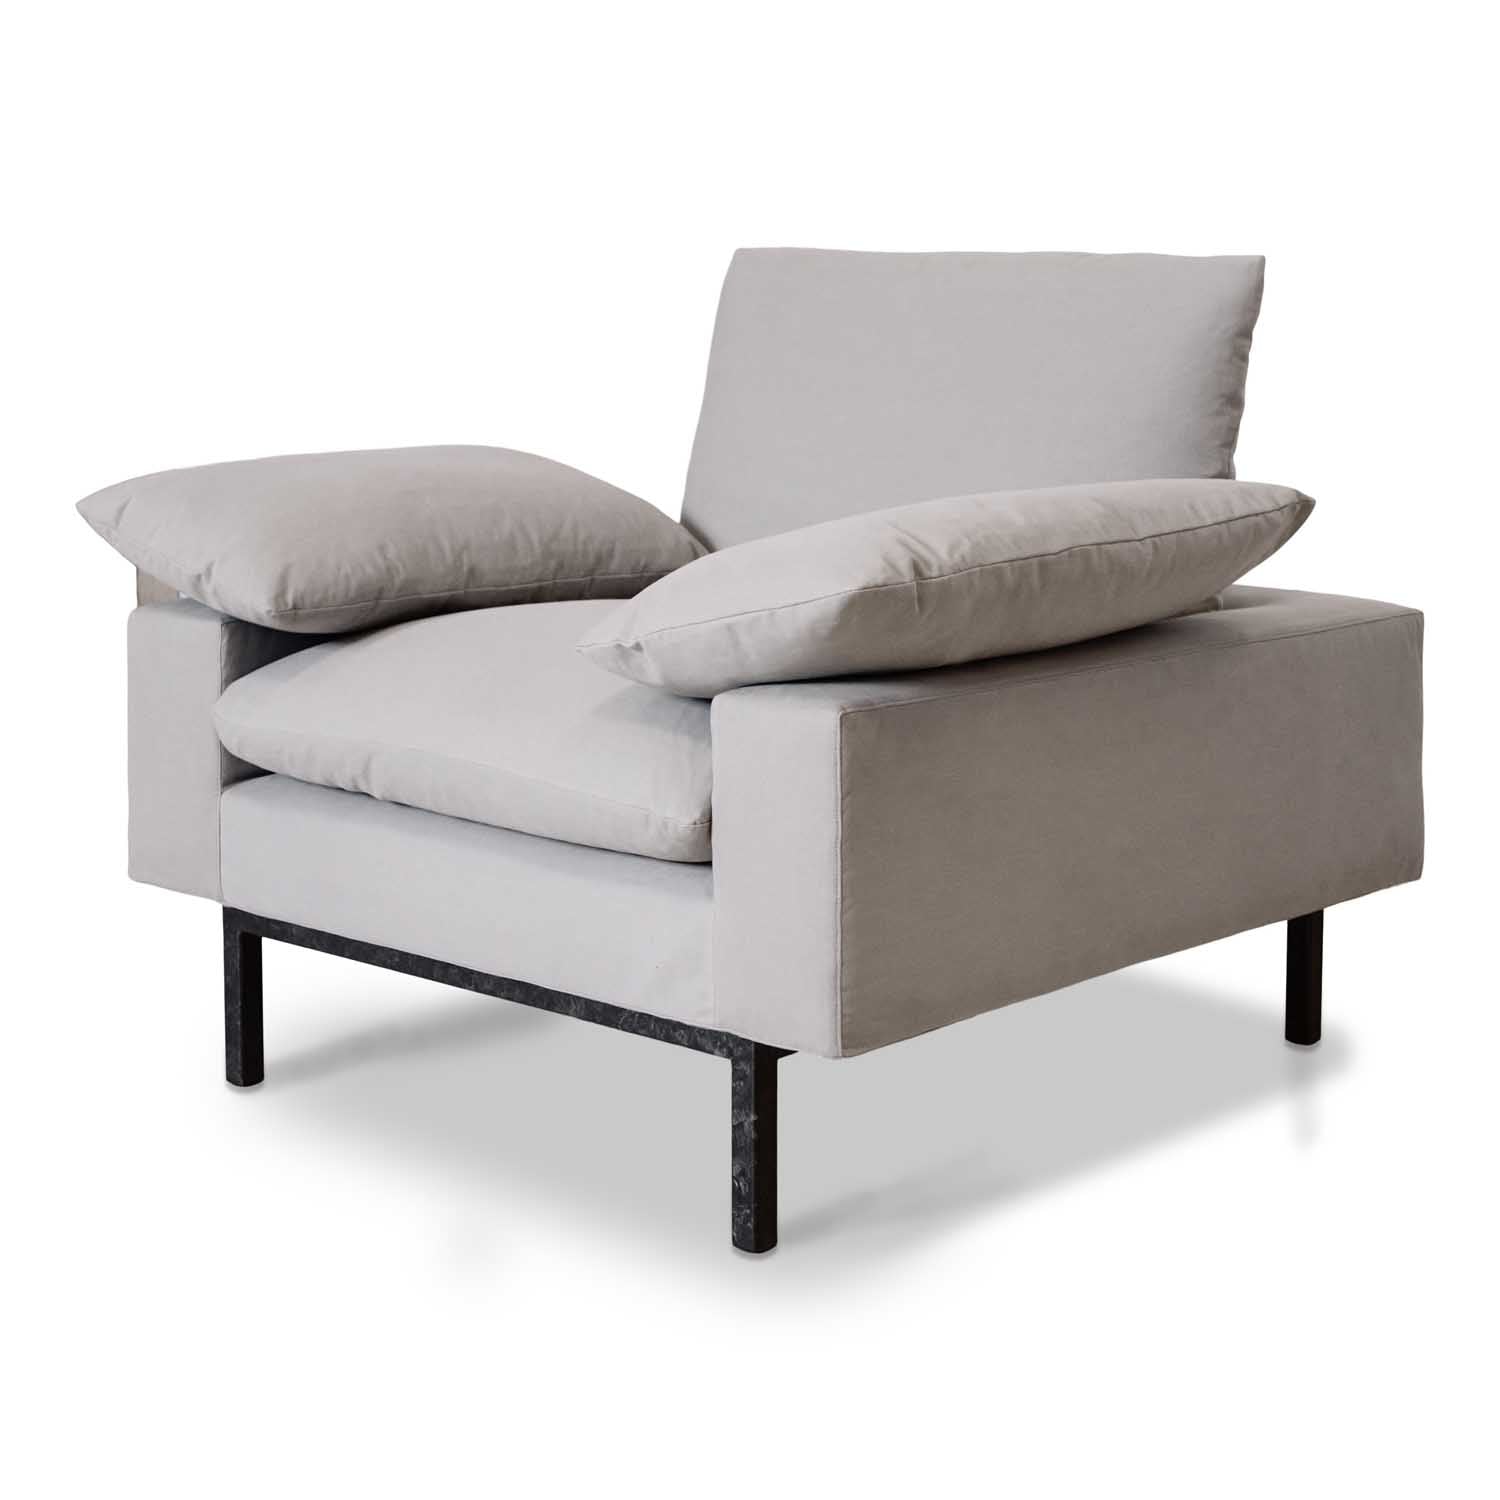 Goose Down, Latex, and Cotton Padding. Grey cotton sustainable armchair.